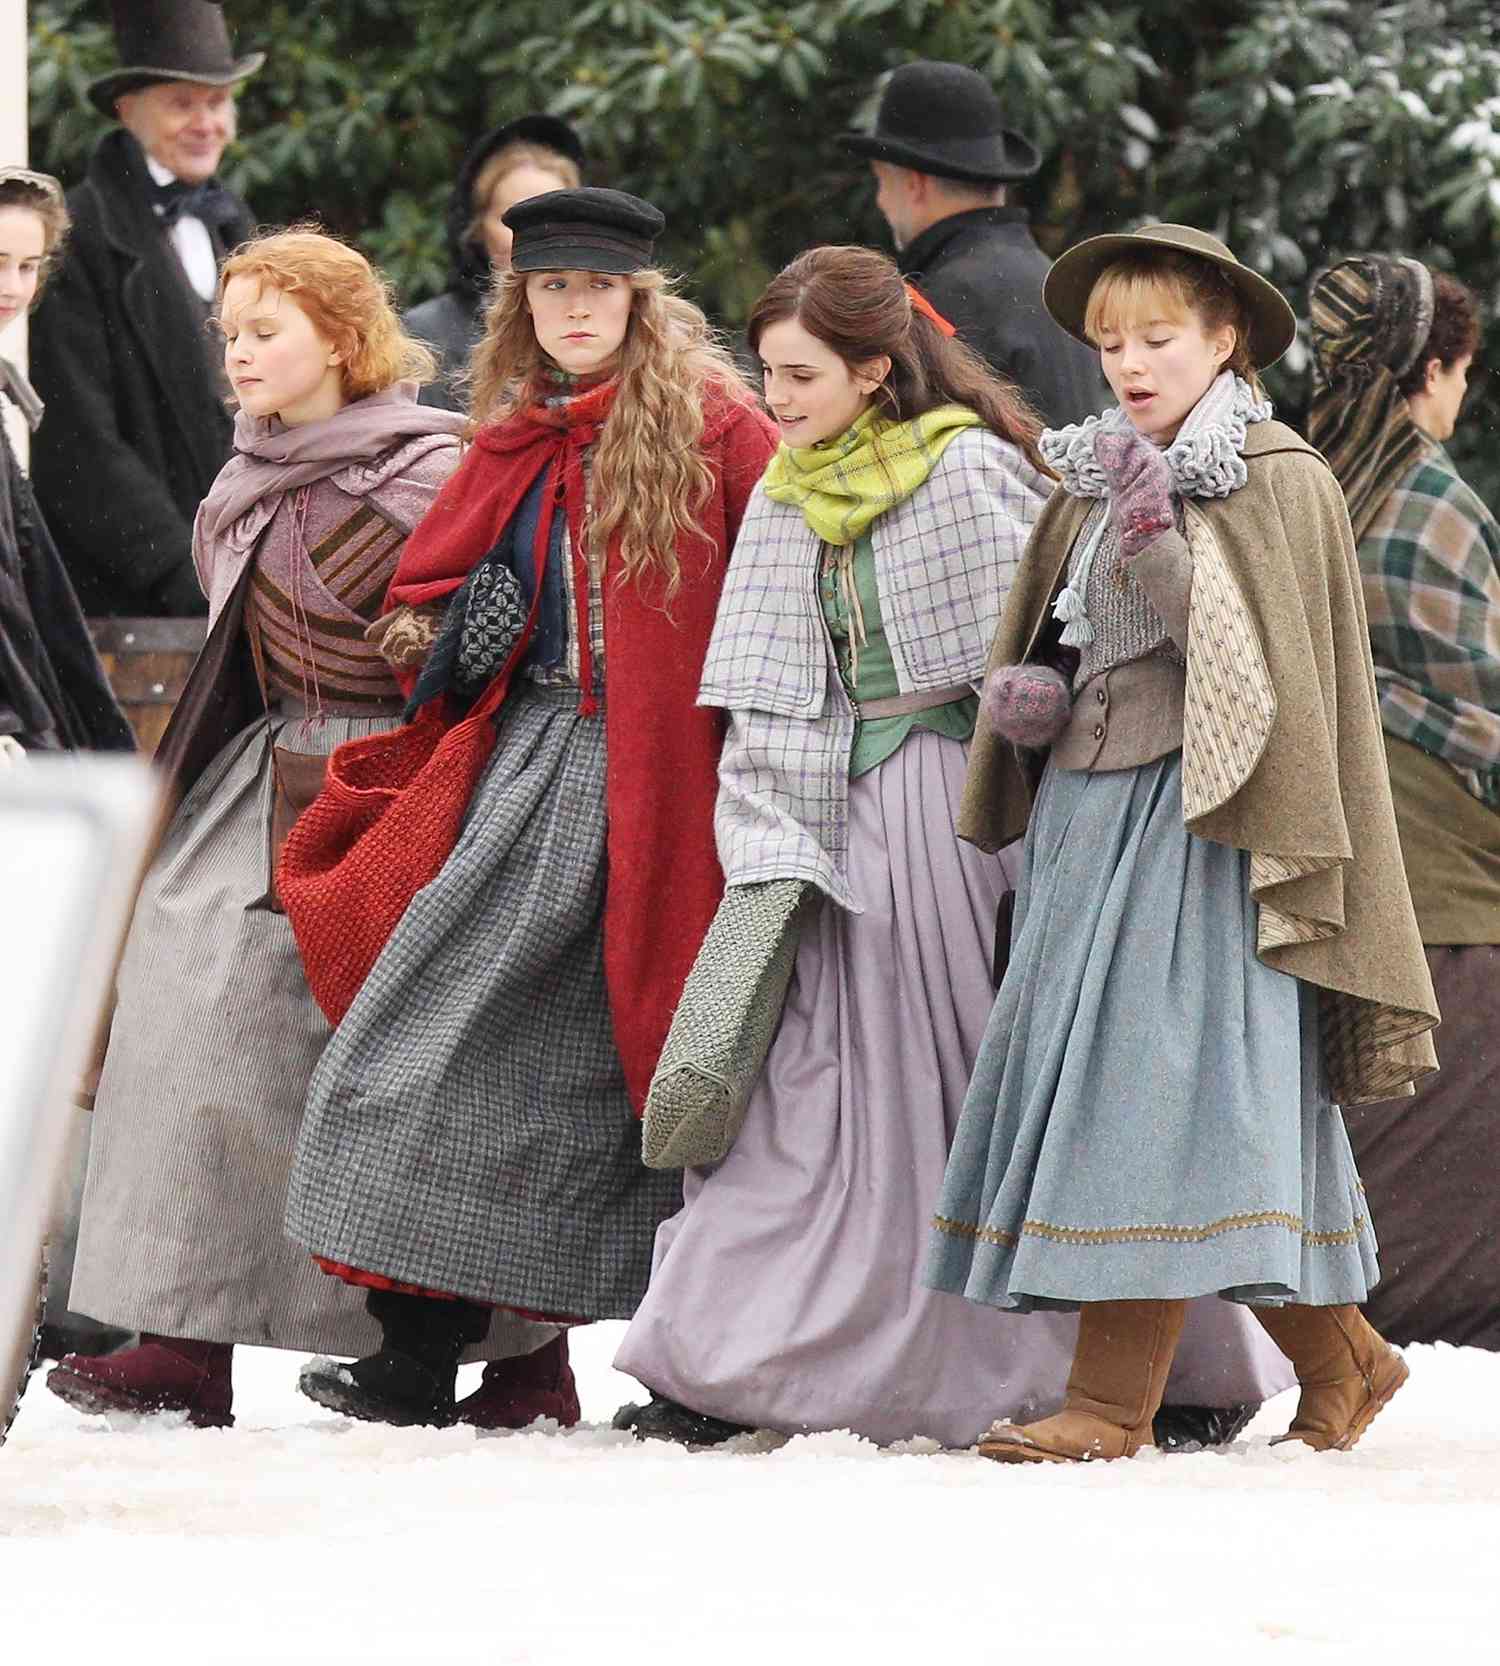 *EXCLUSIVE* Emma Watson, Florence Pugh, Saoirse Ronan and Eliza Scanlen get into character for "Little Women"